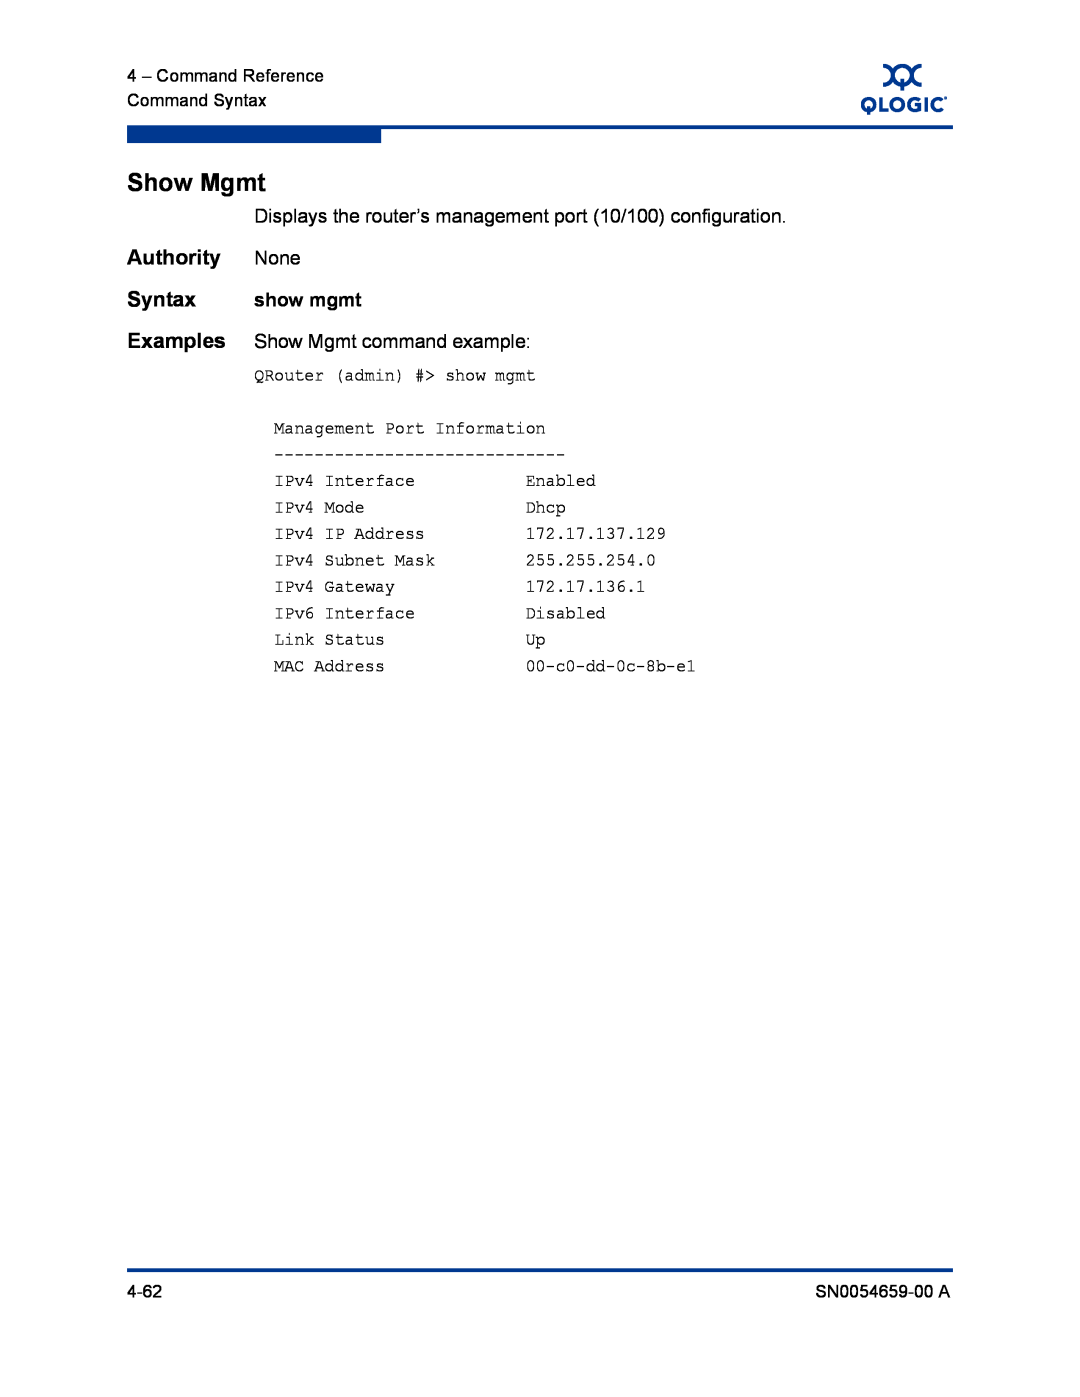 Q-Logic ISR6142 manual Show Mgmt, Authority None, Syntax, show mgmt 